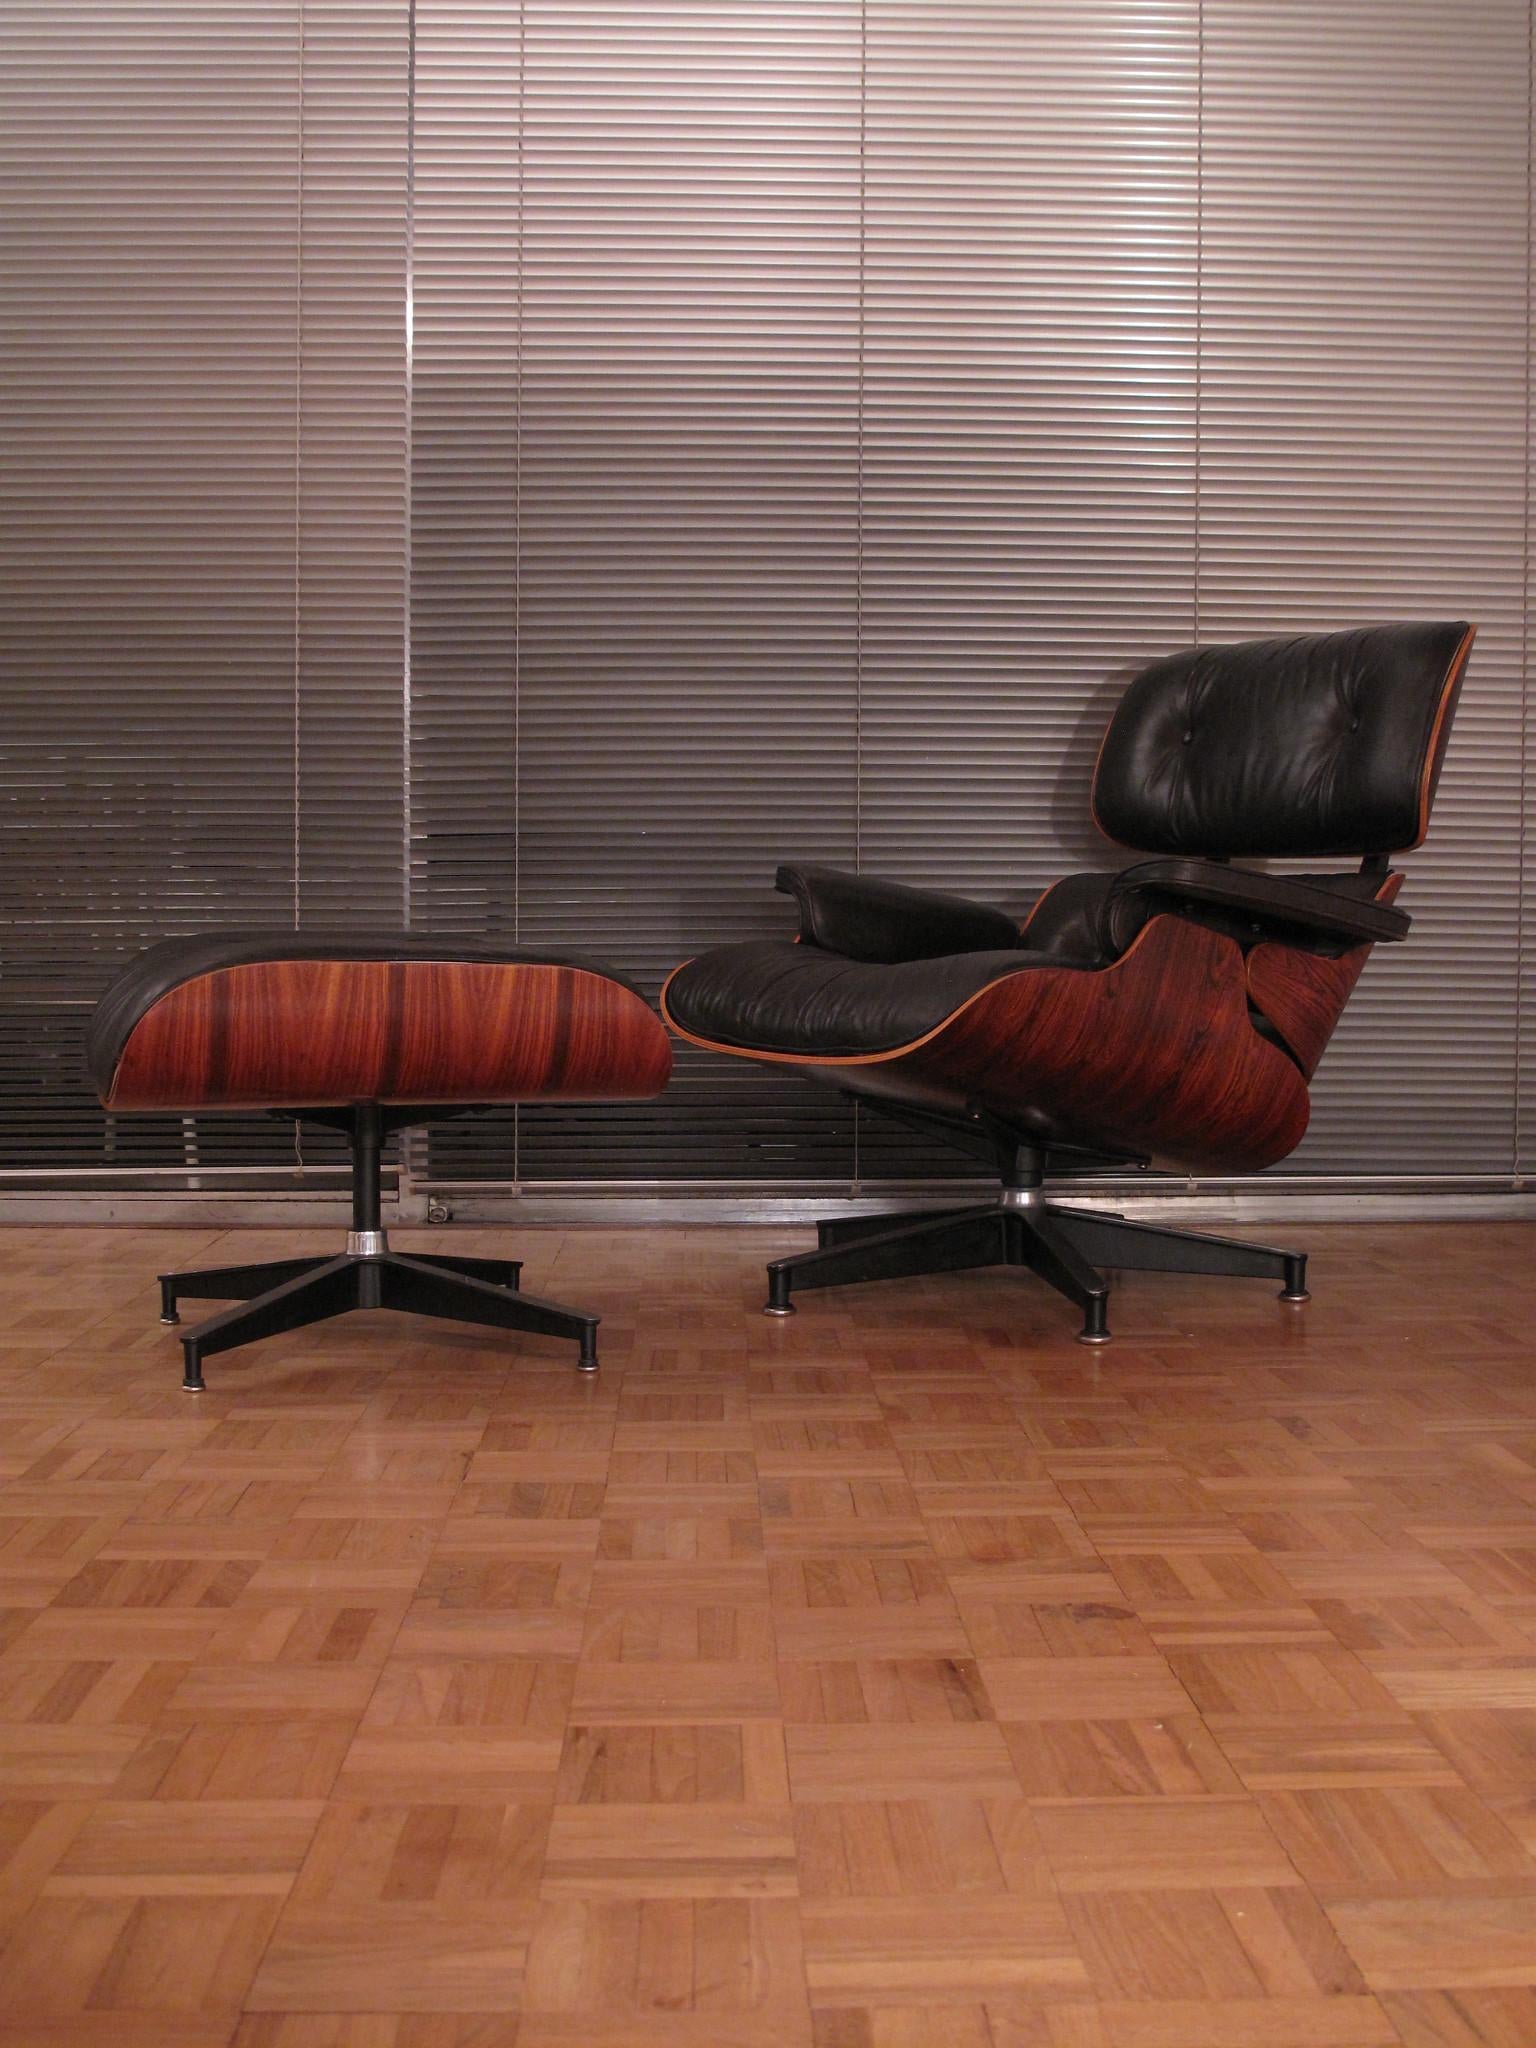 A wonderful Brazilian rosewood and black leather chair and footstool produced by Herman Miller. This chair was purchased from the original owner who bought it new in the mid-late 1970s.

The chair has been very well cared for over the years and is